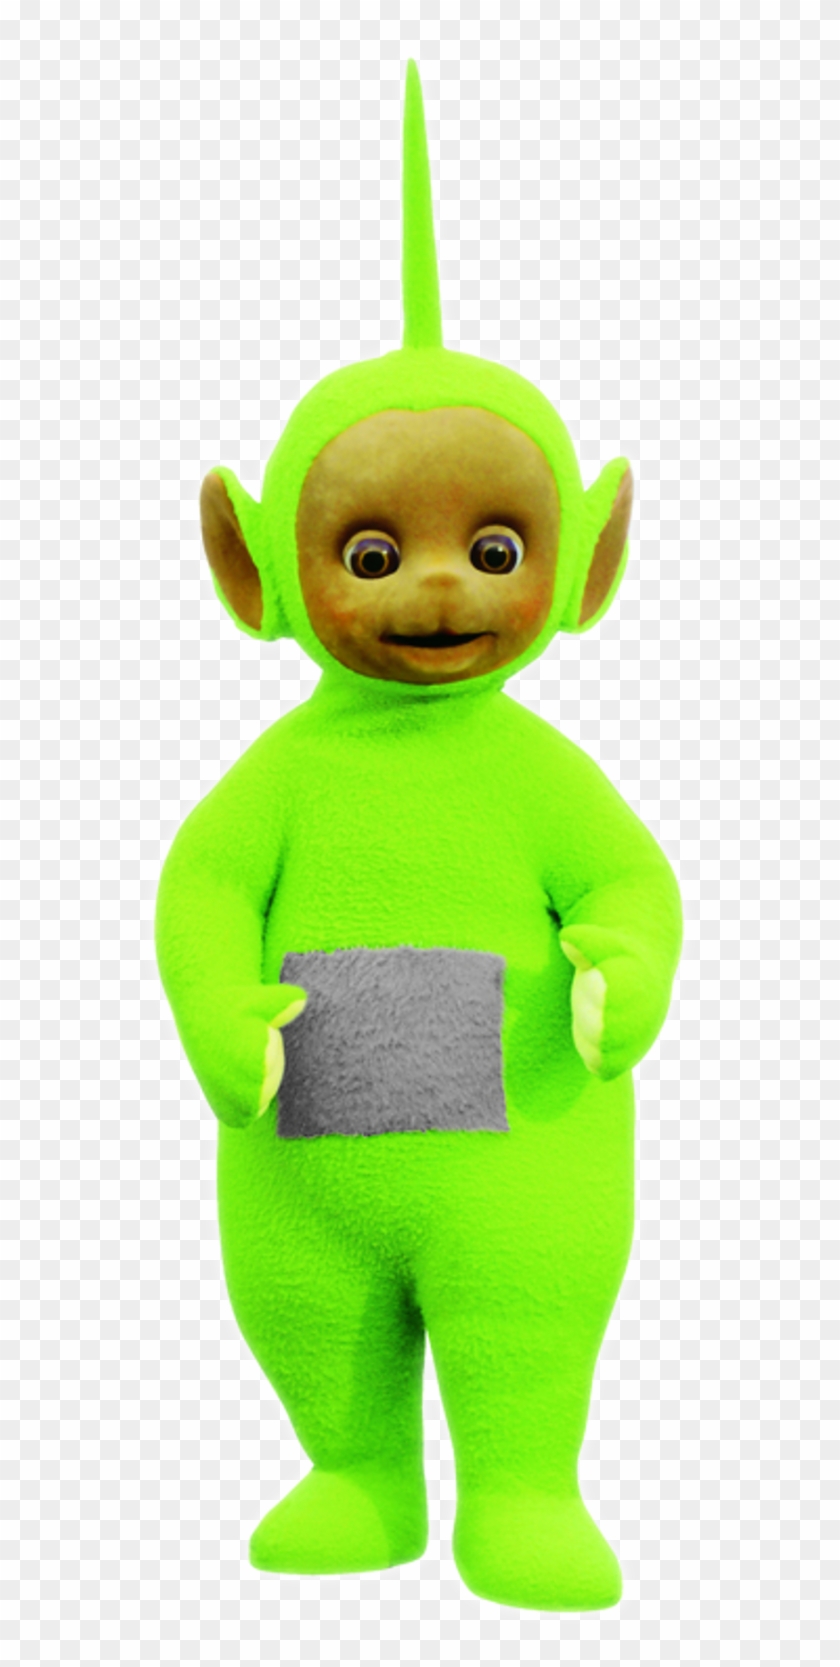 Teletubbies - Dipsy Png Teletubbies Dipsy Clipart